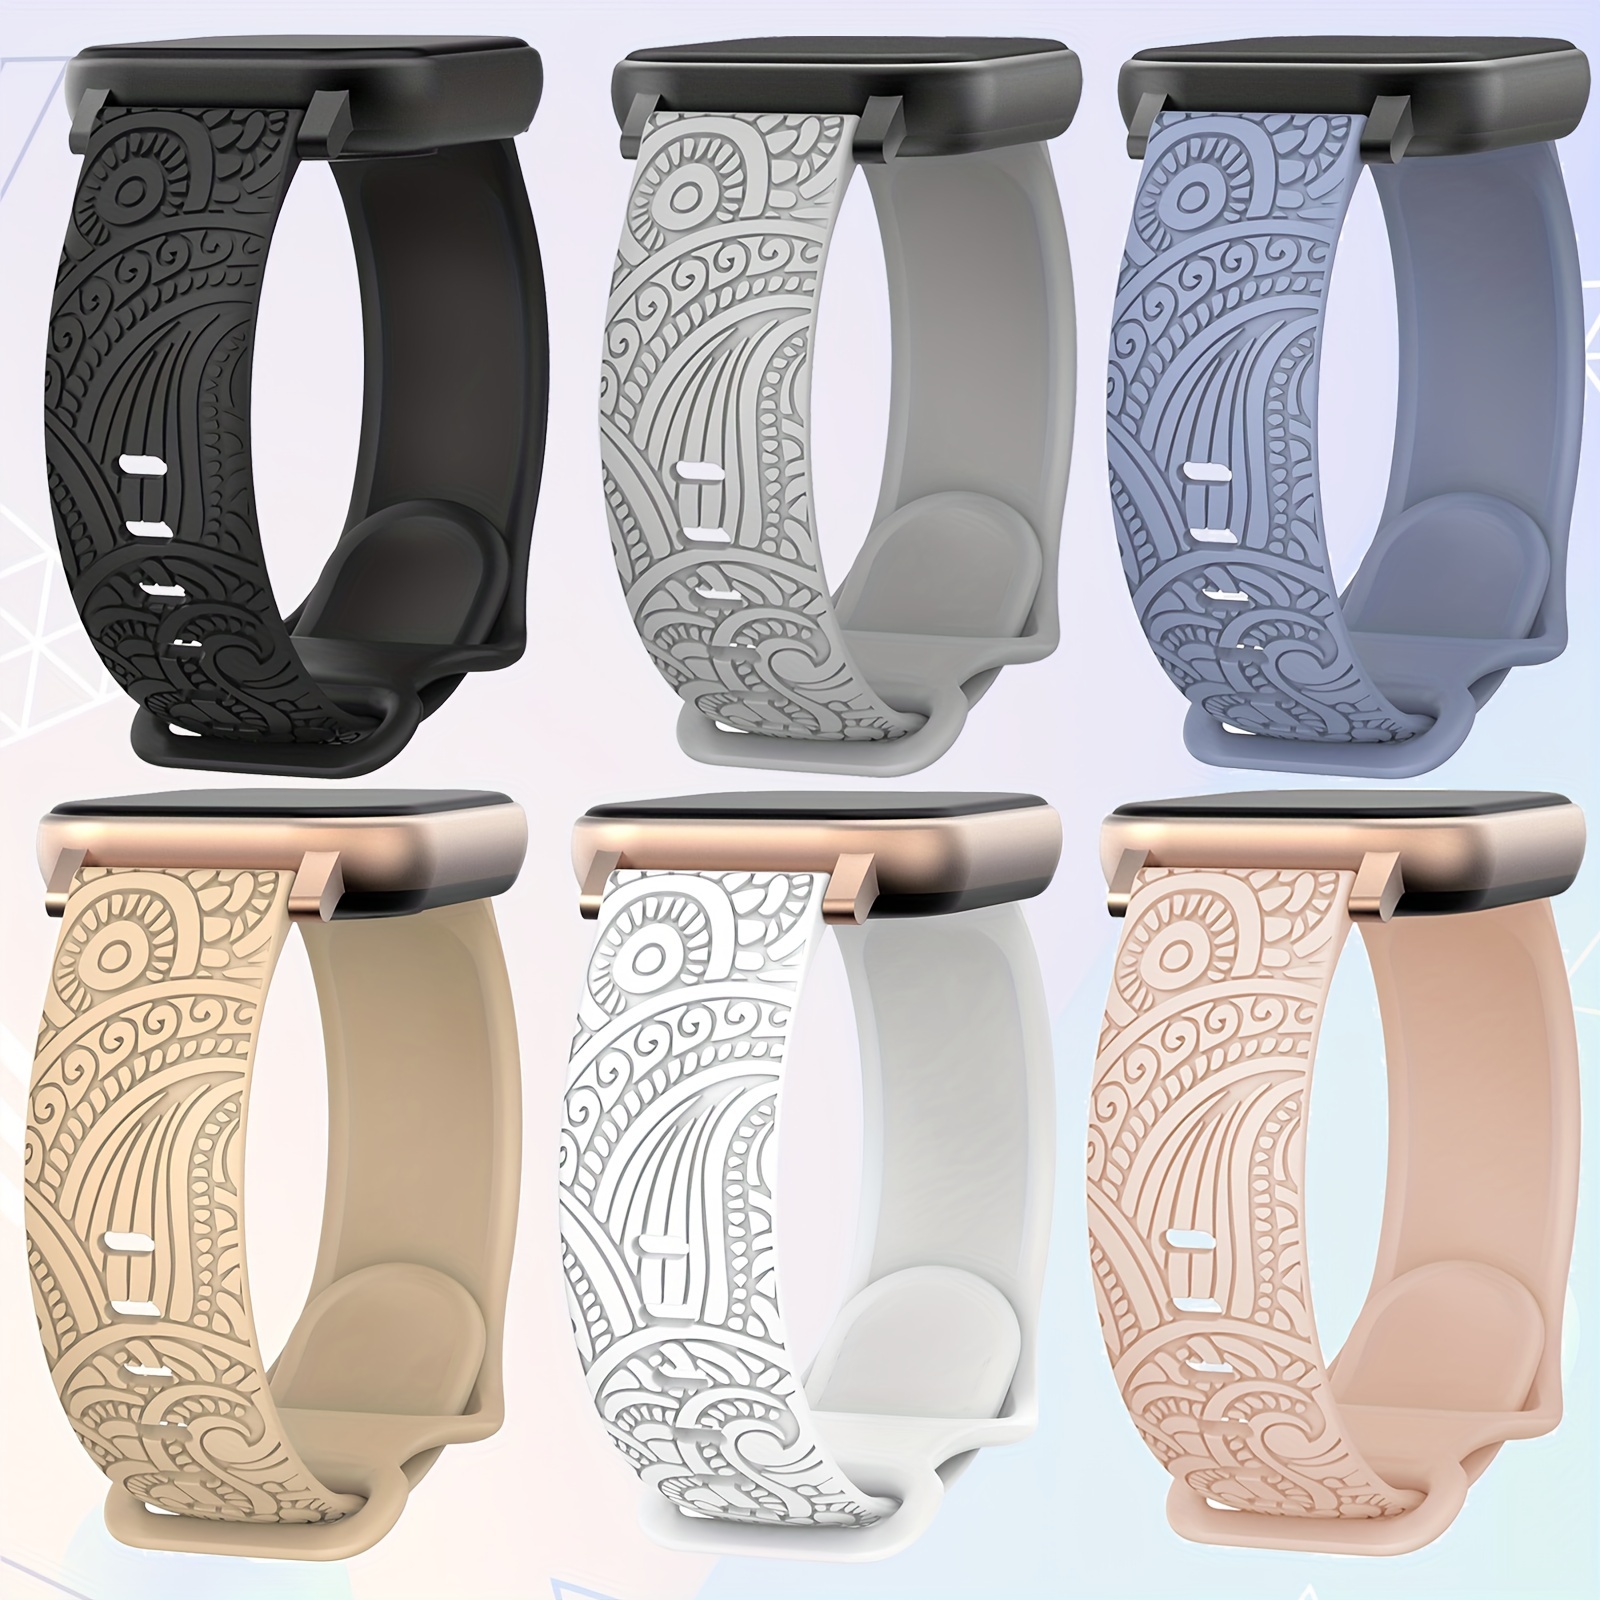 

20mm Silicone Floral Engraved Pattern Band Compatible With Amazfit Gts 4, Gts 2 Mini, Gts 2, Gts 2e, Gts 3, Amazfit Bip, Bip U, Bip U Pro, Amazfit Gtr 42mm, Replacement Strap For Women.